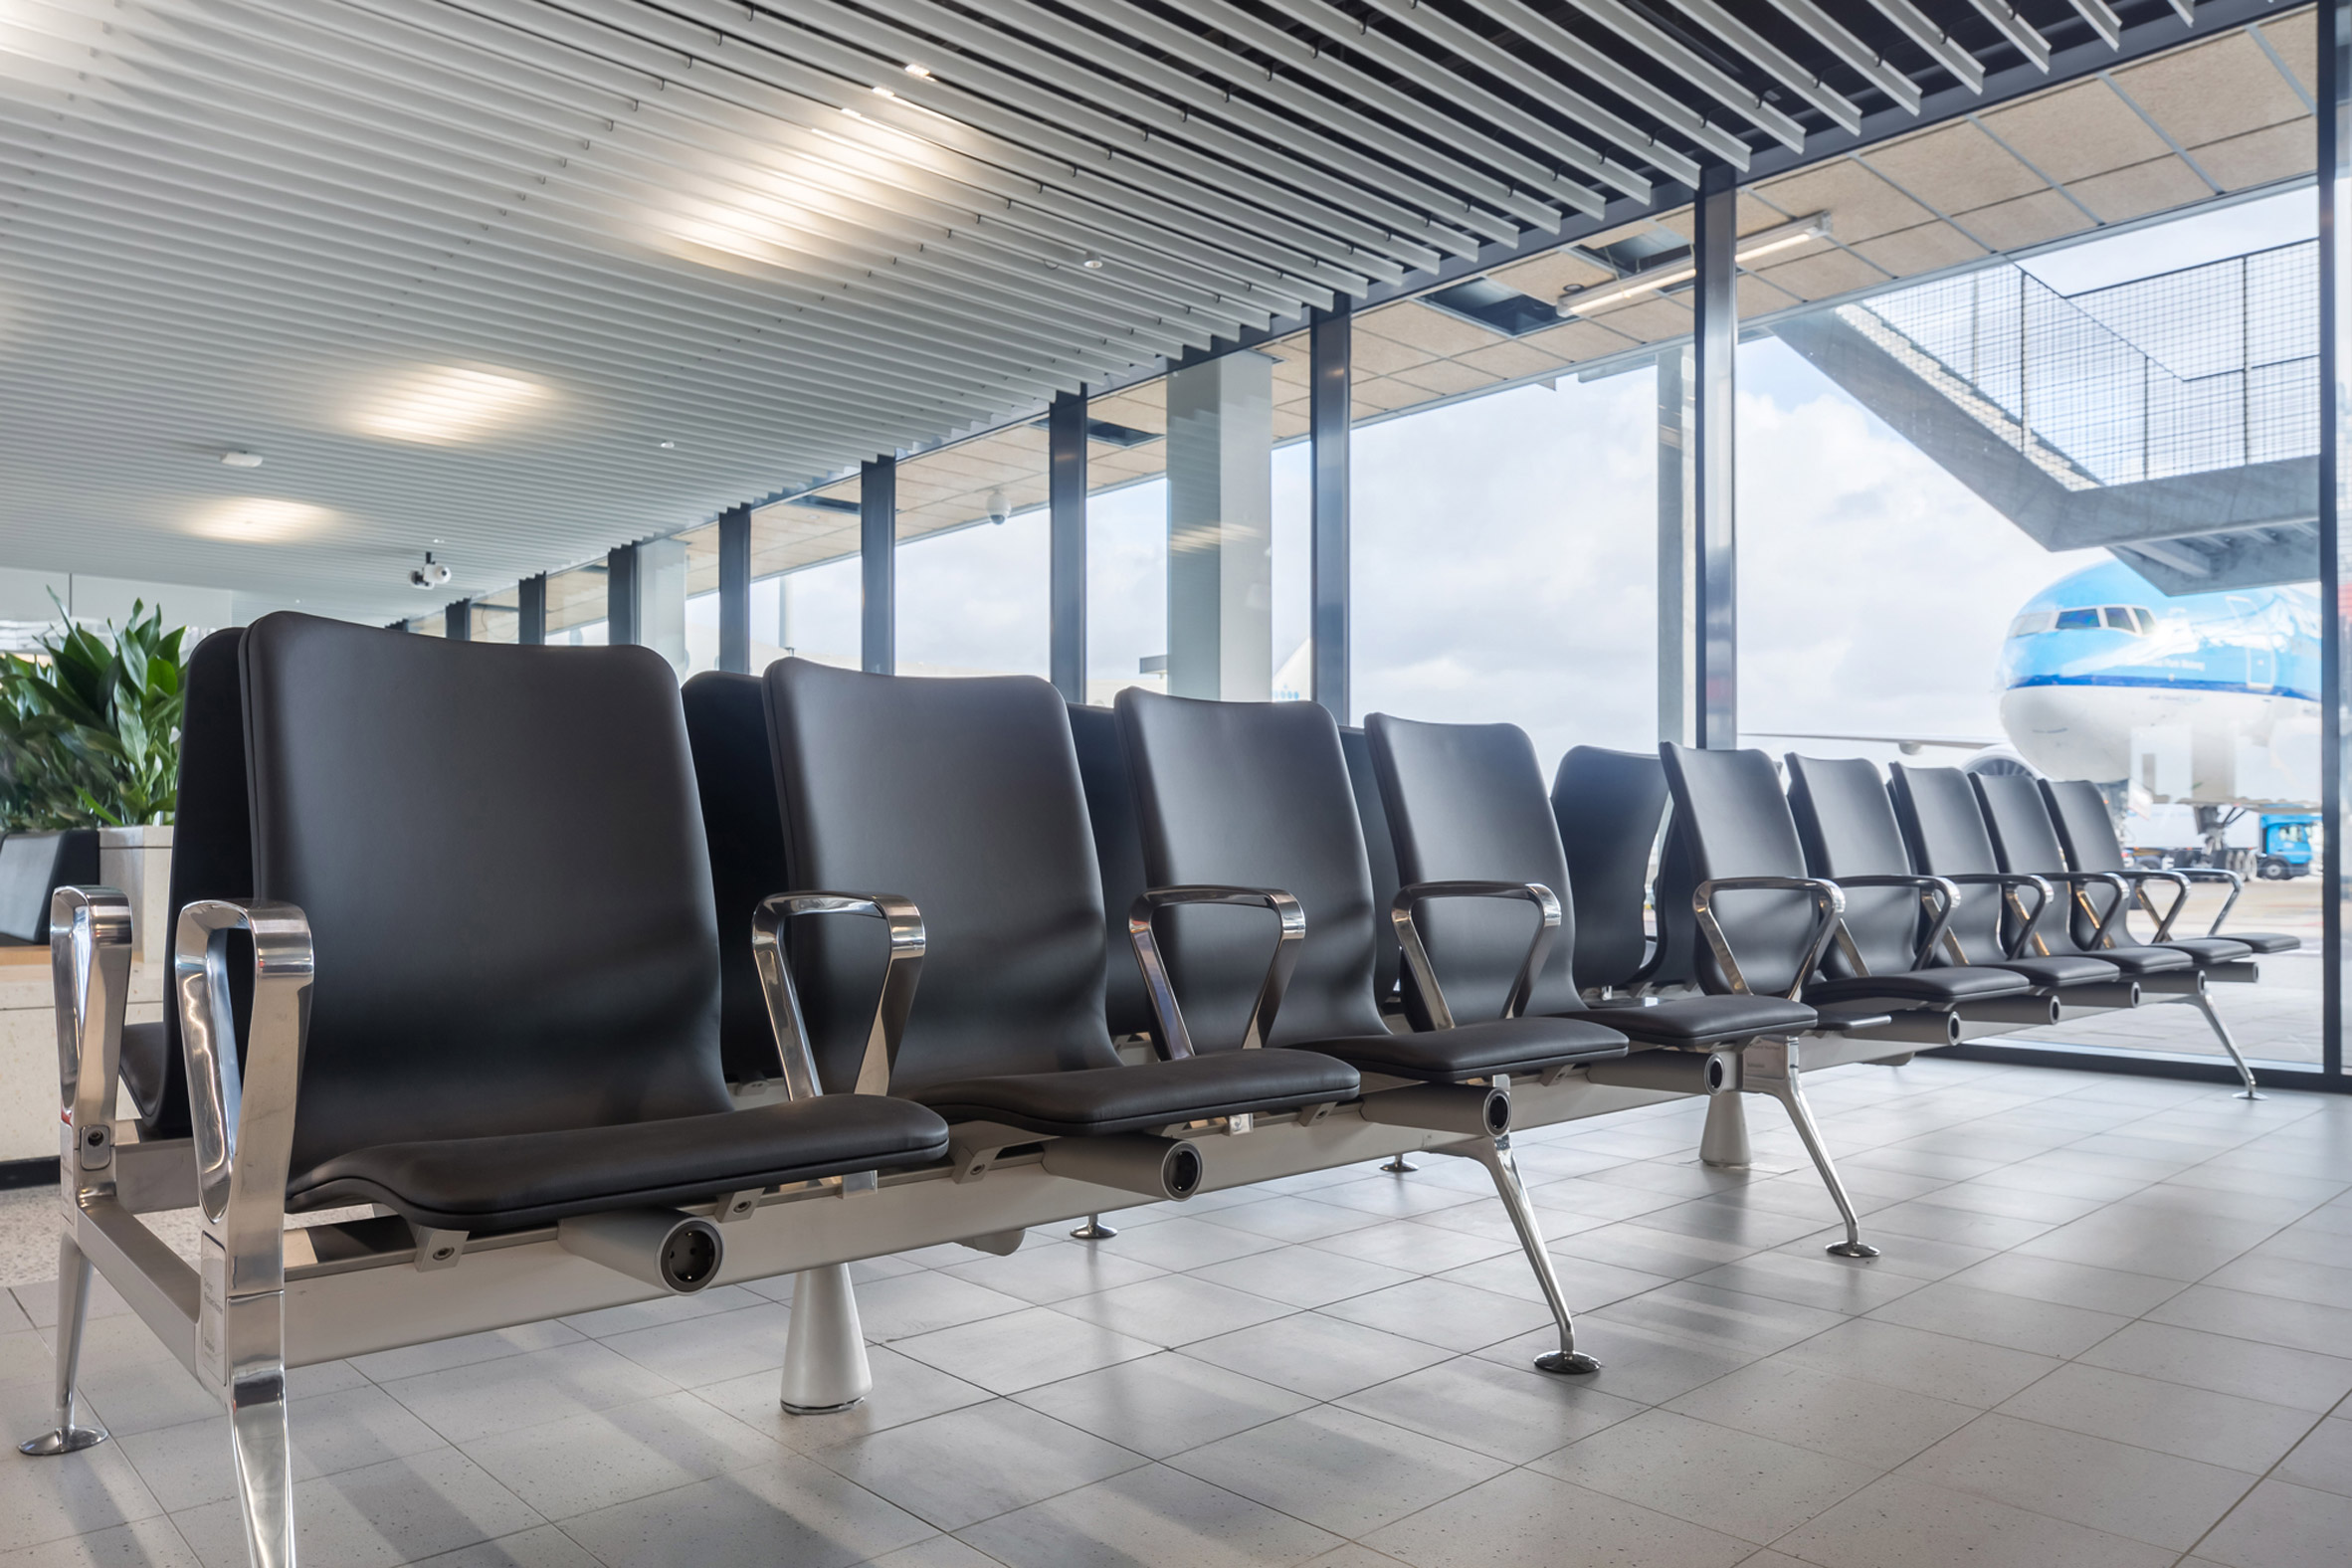 Richard Hutten melts down Schiphol airport's old chairs for new Blink seating system with Lensvelt